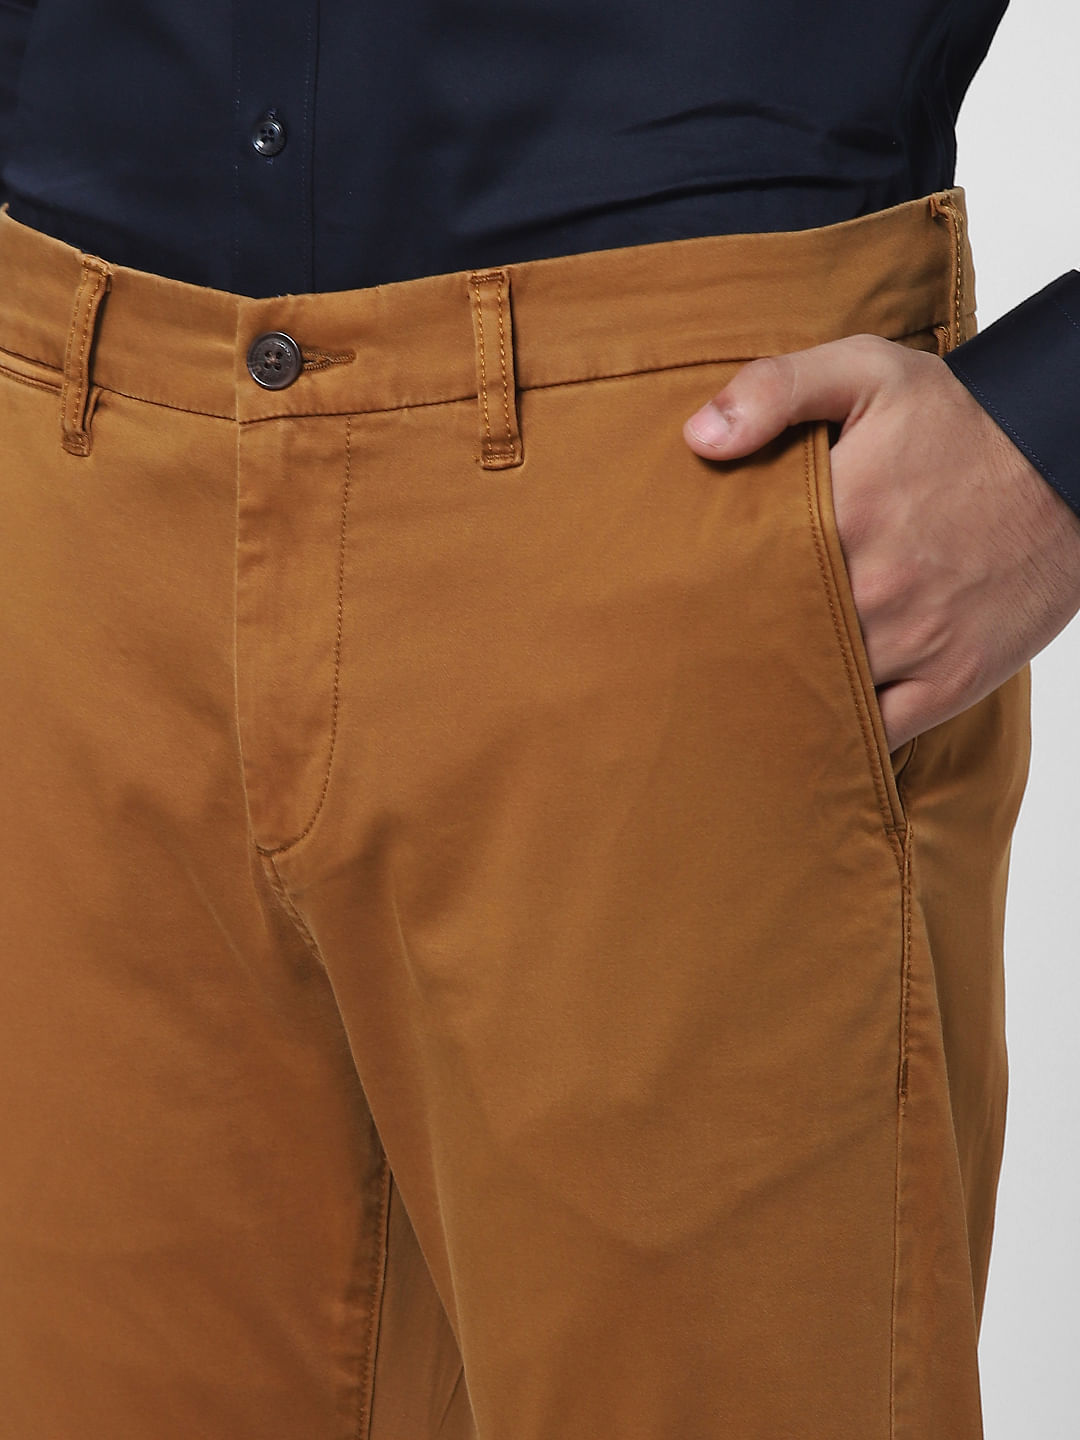 The 12 best chino pants for men in fall 2022